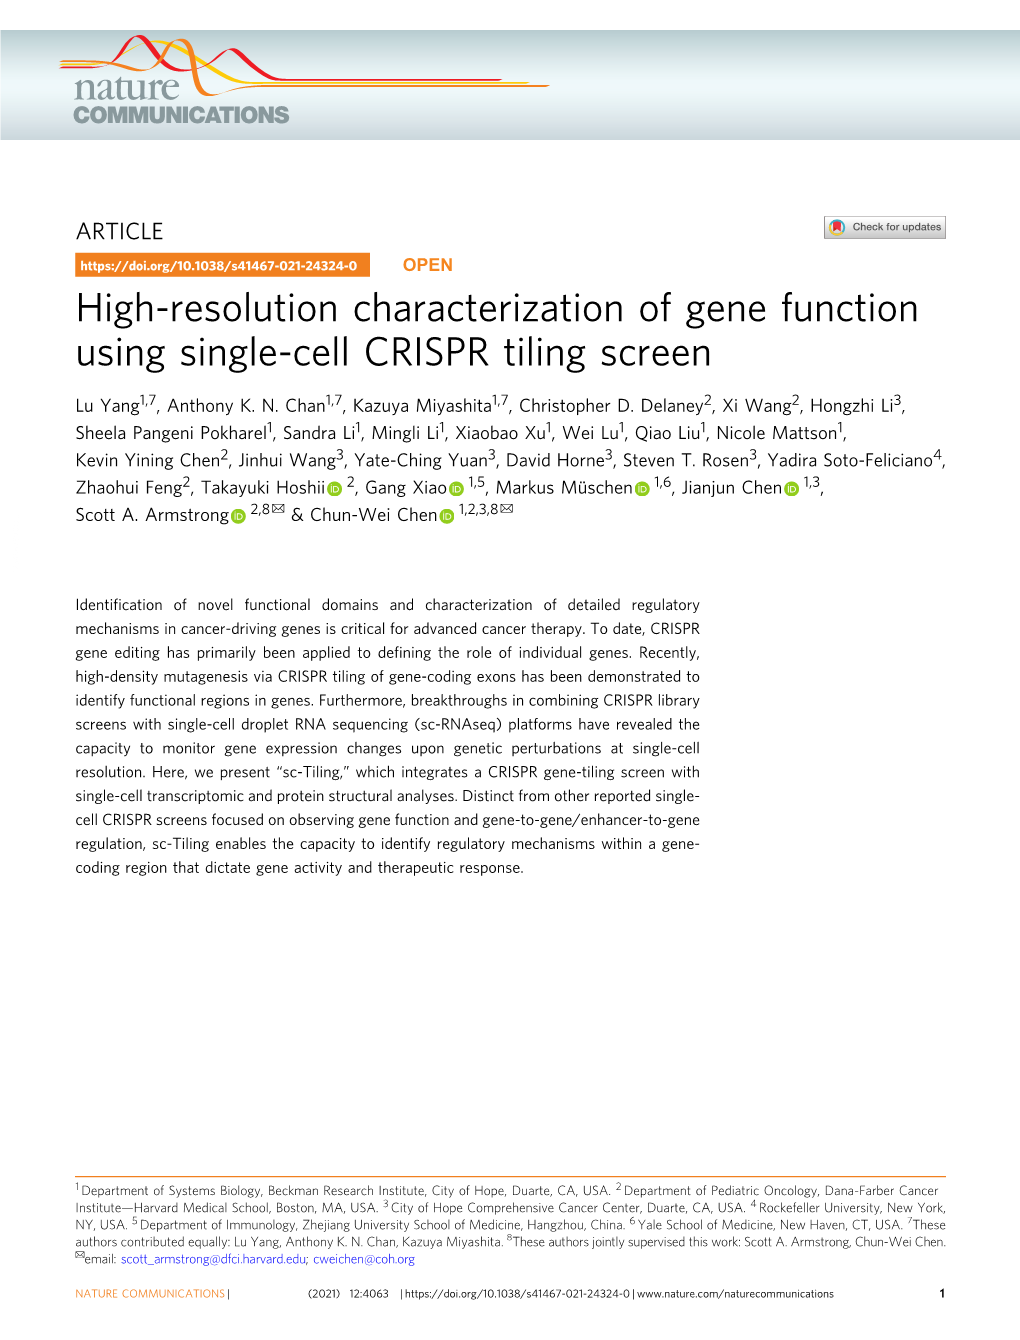 High-Resolution Characterization of Gene Function Using Single-Cell CRISPR Tiling Screen